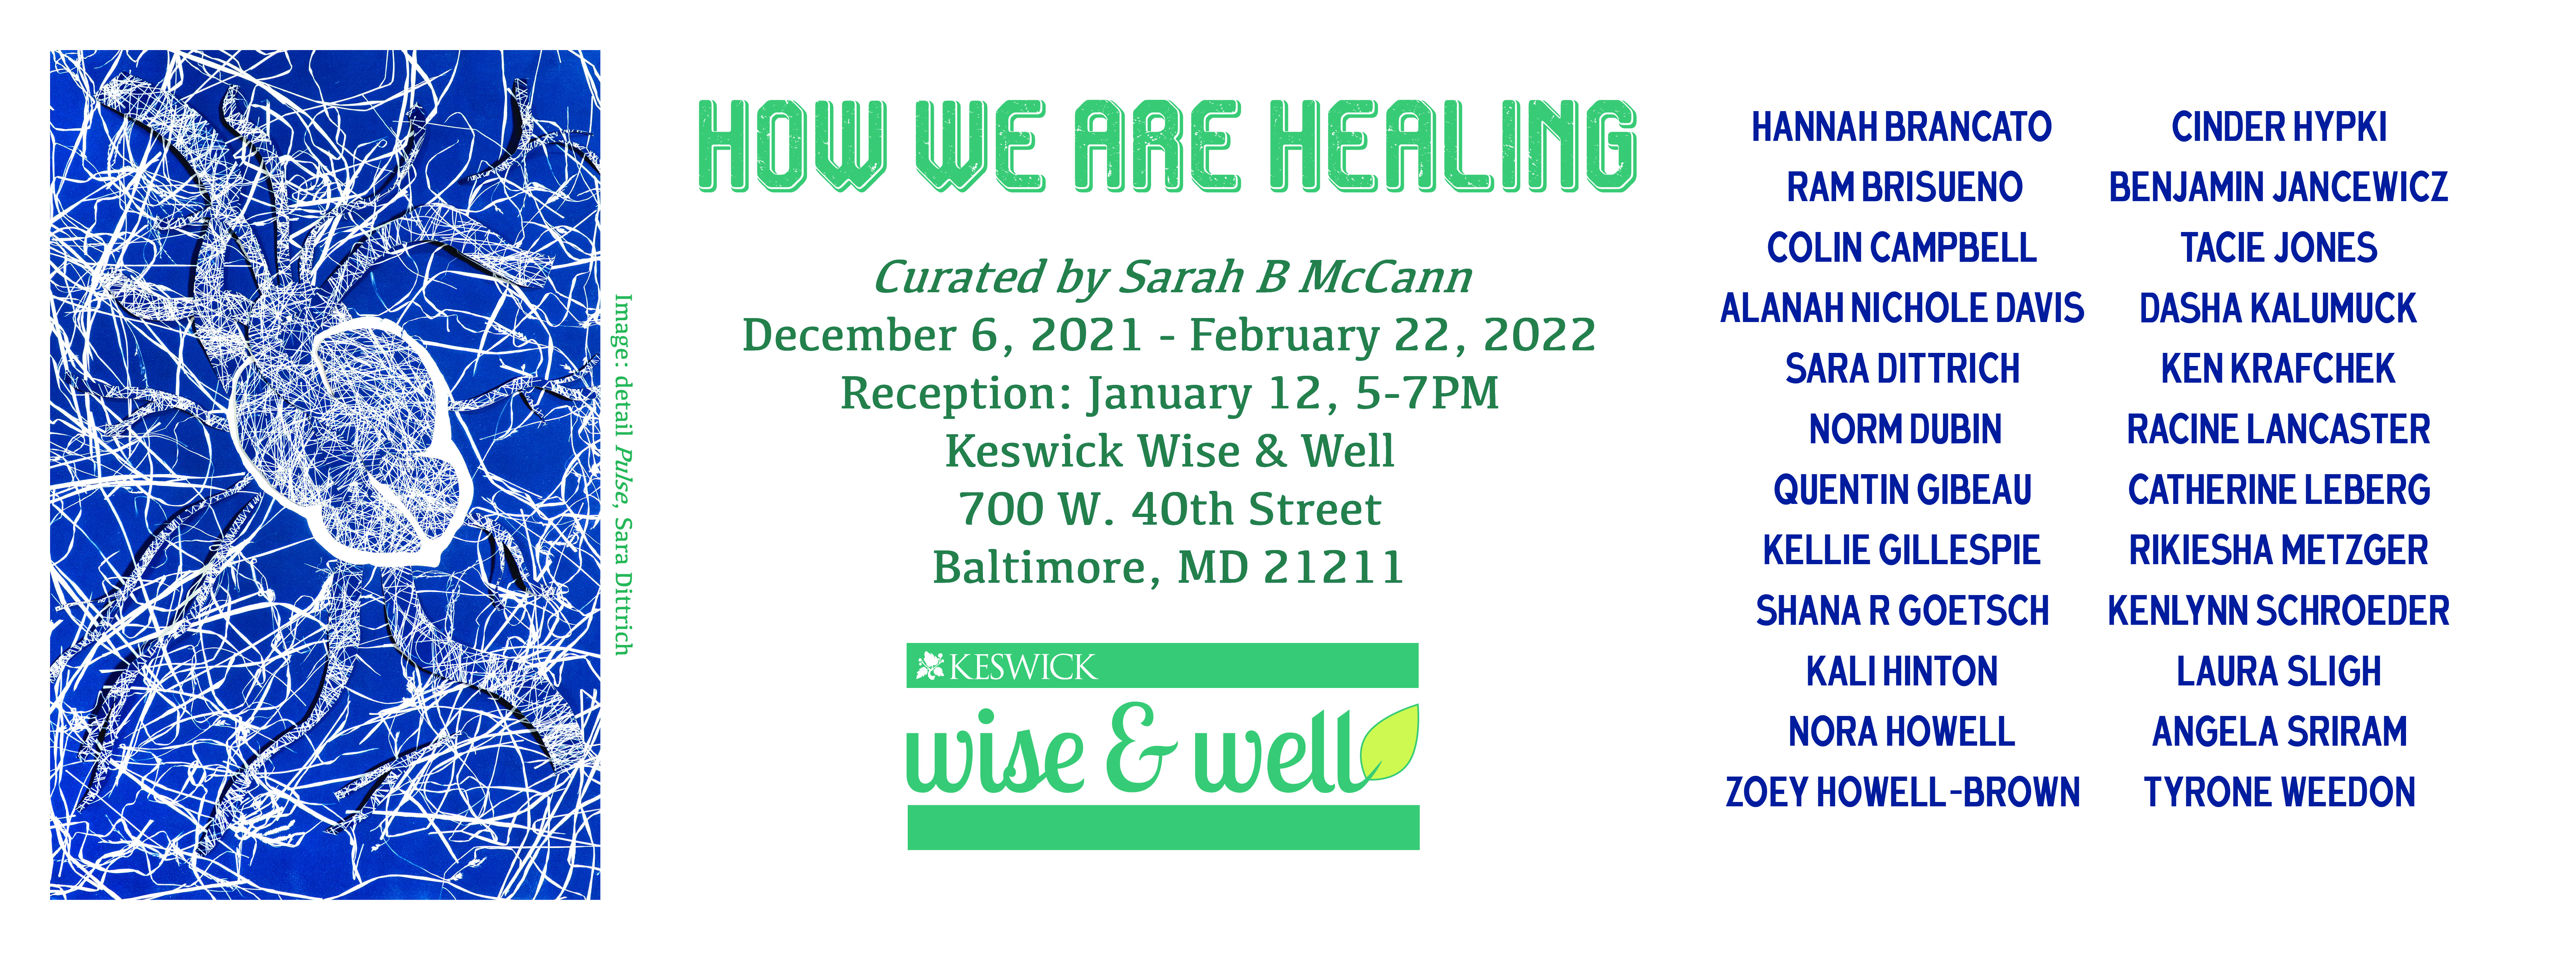 How We Are Healing curated by Sarah B McCann December 6, 2021 - February 22, 2022 Reception, January 12, 5-7pm Keswick Wise & Well 700 W 40th St Baltimore MD 21211